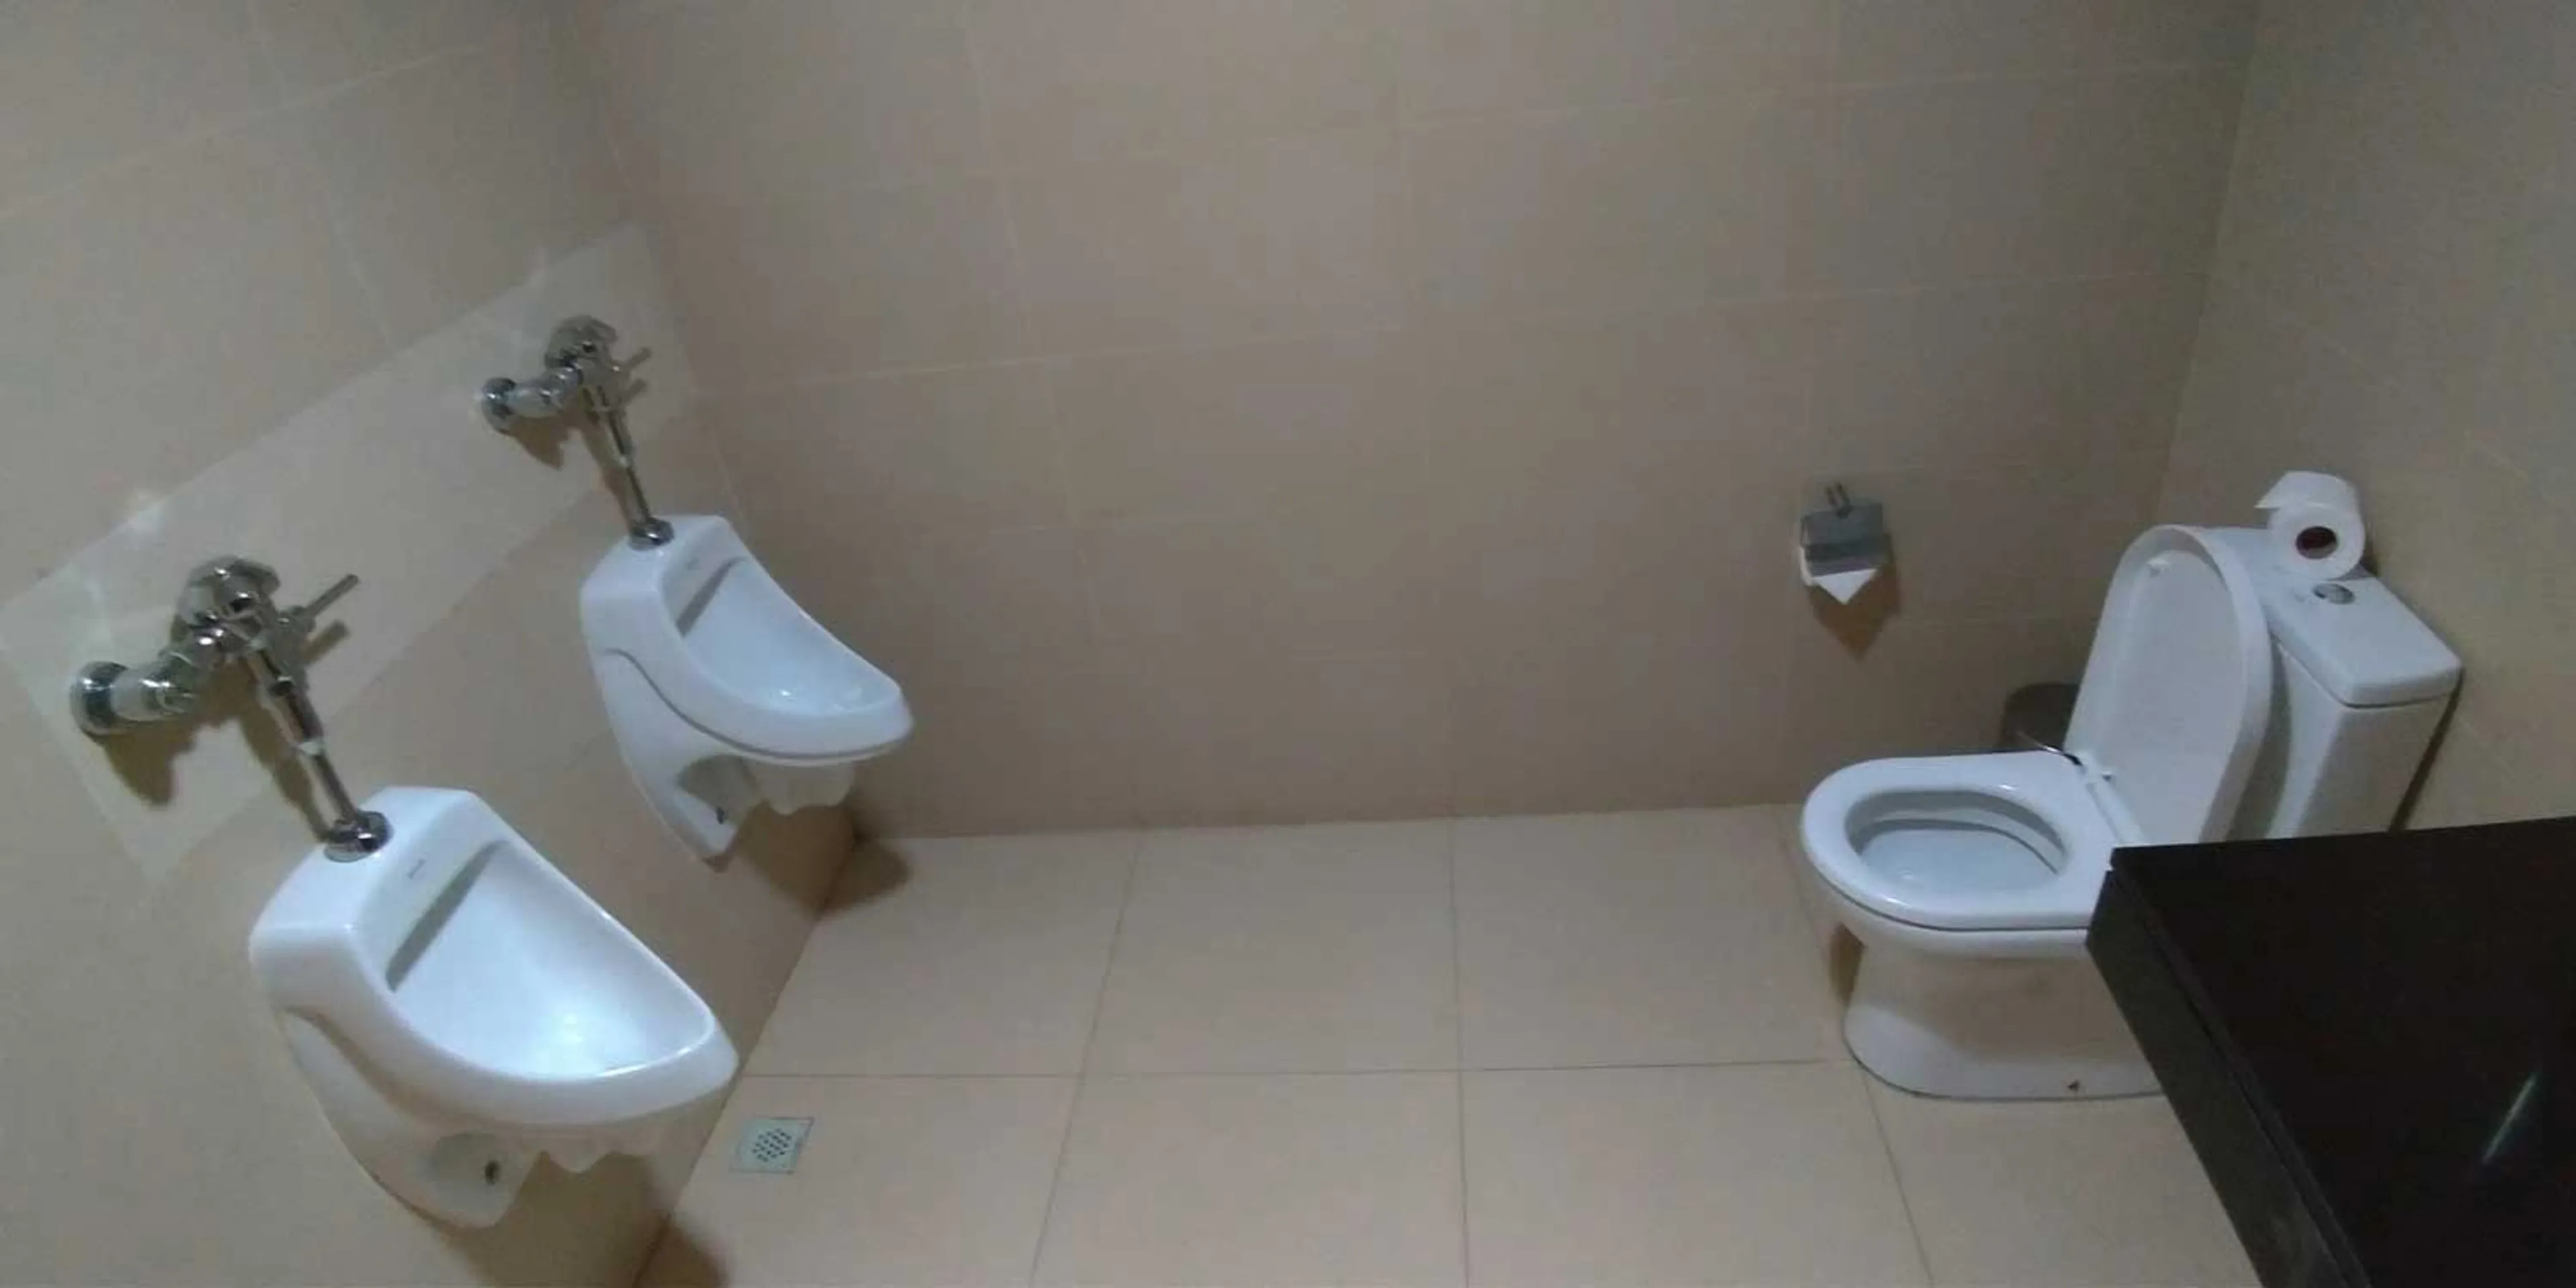 Two urinals and a toilet in a washroom. There are no stalls.